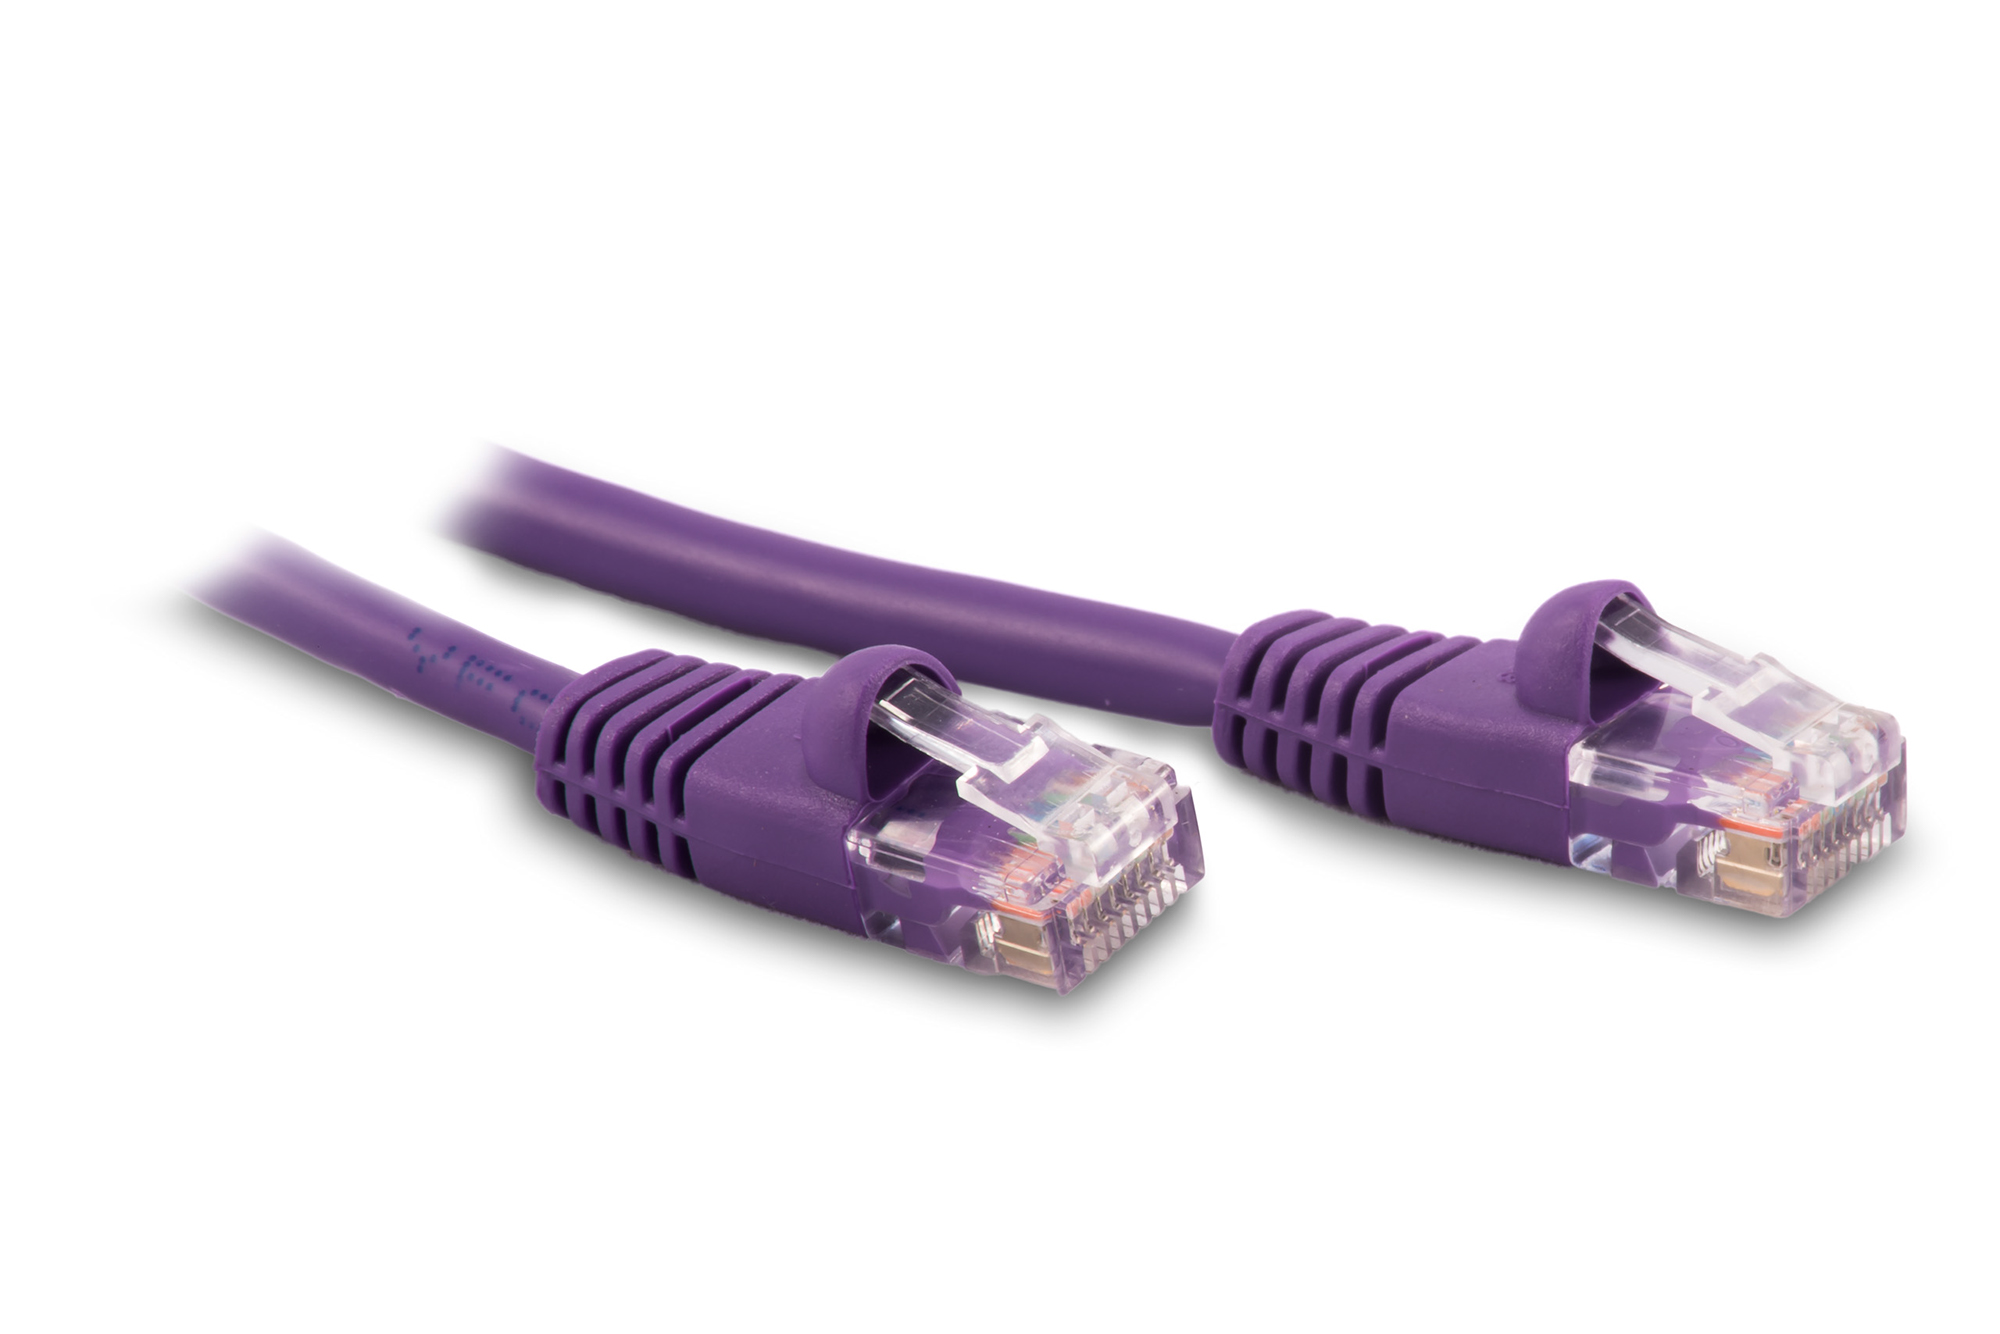 12ft Cat6 Ethernet Patch Cable - Violet Color - Snagless Boot